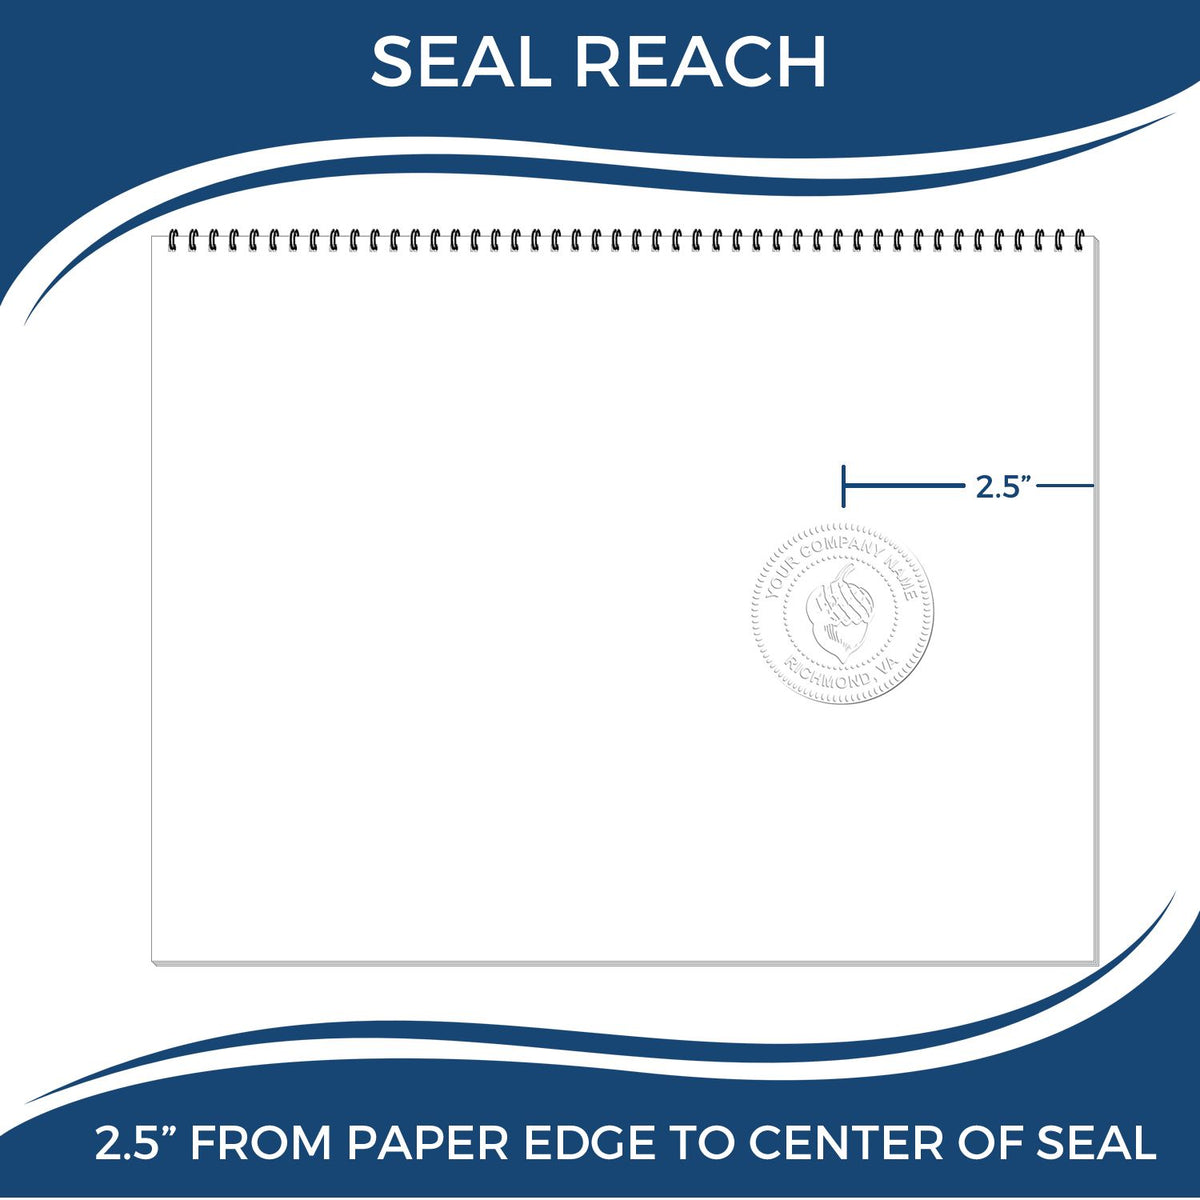 An infographic showing the seal reach which is represented by a ruler and a miniature seal image of the Heavy Duty Cast Iron Michigan Engineer Seal Embosser